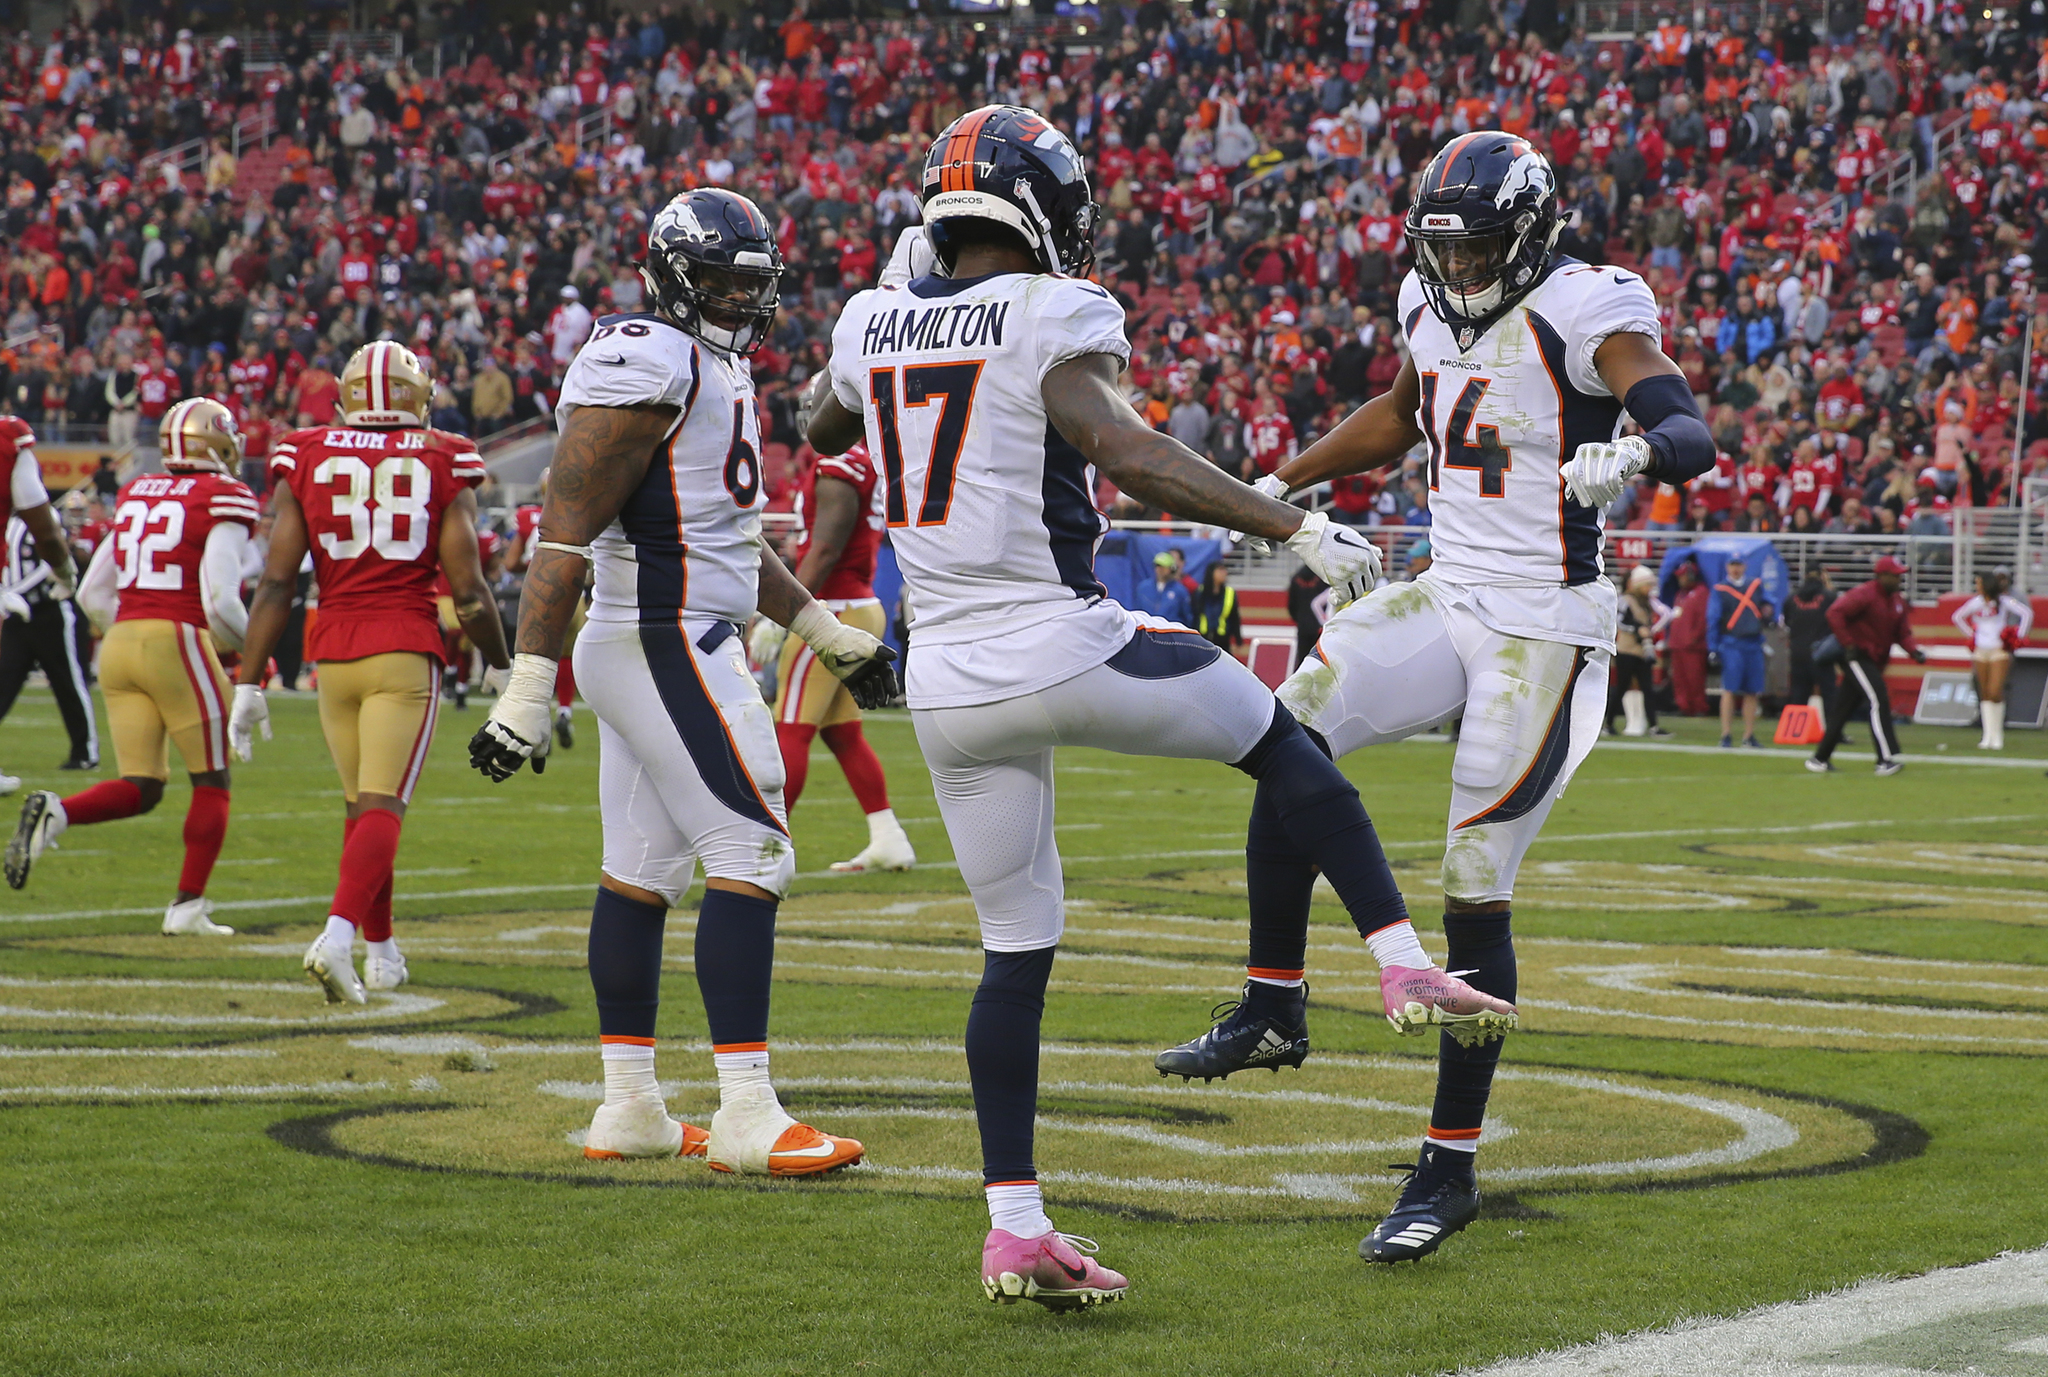 Broncos vs. 49ers live stream: TV channel, how to watch